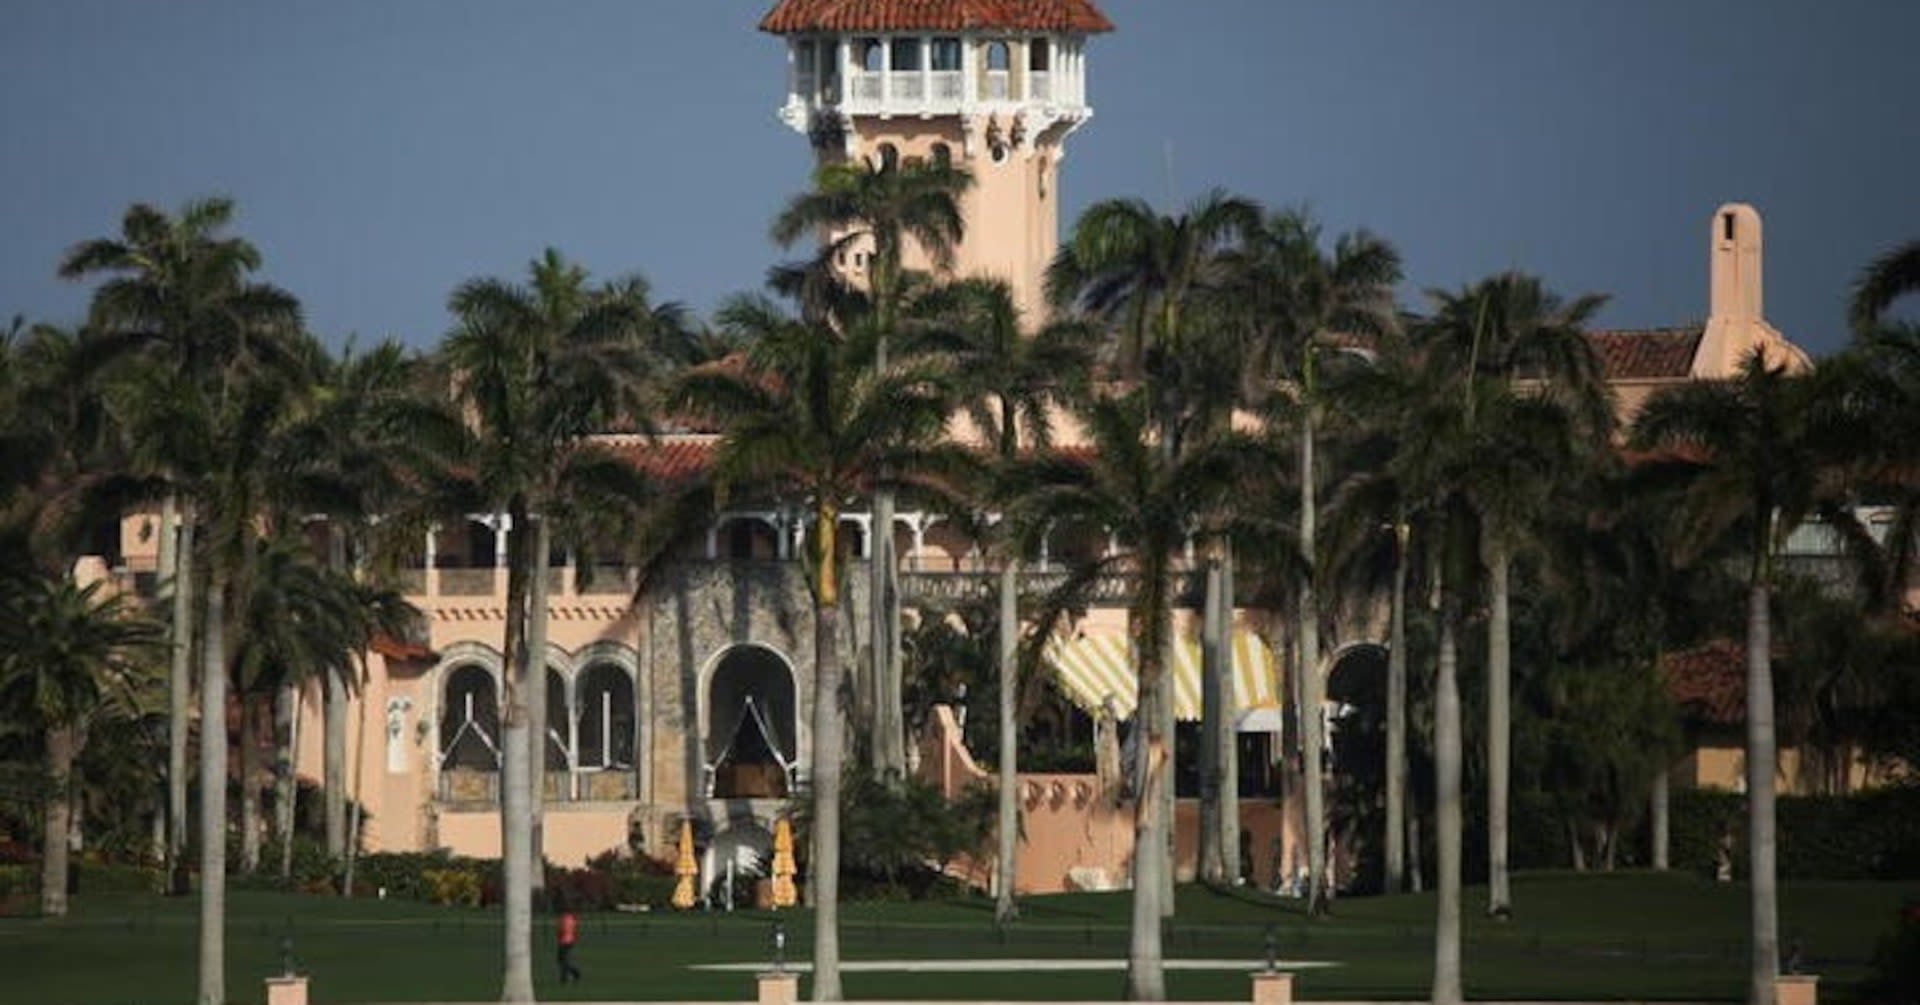 Why the Justice Department has no good option but to appeal Mar-a-Lago case dismissal